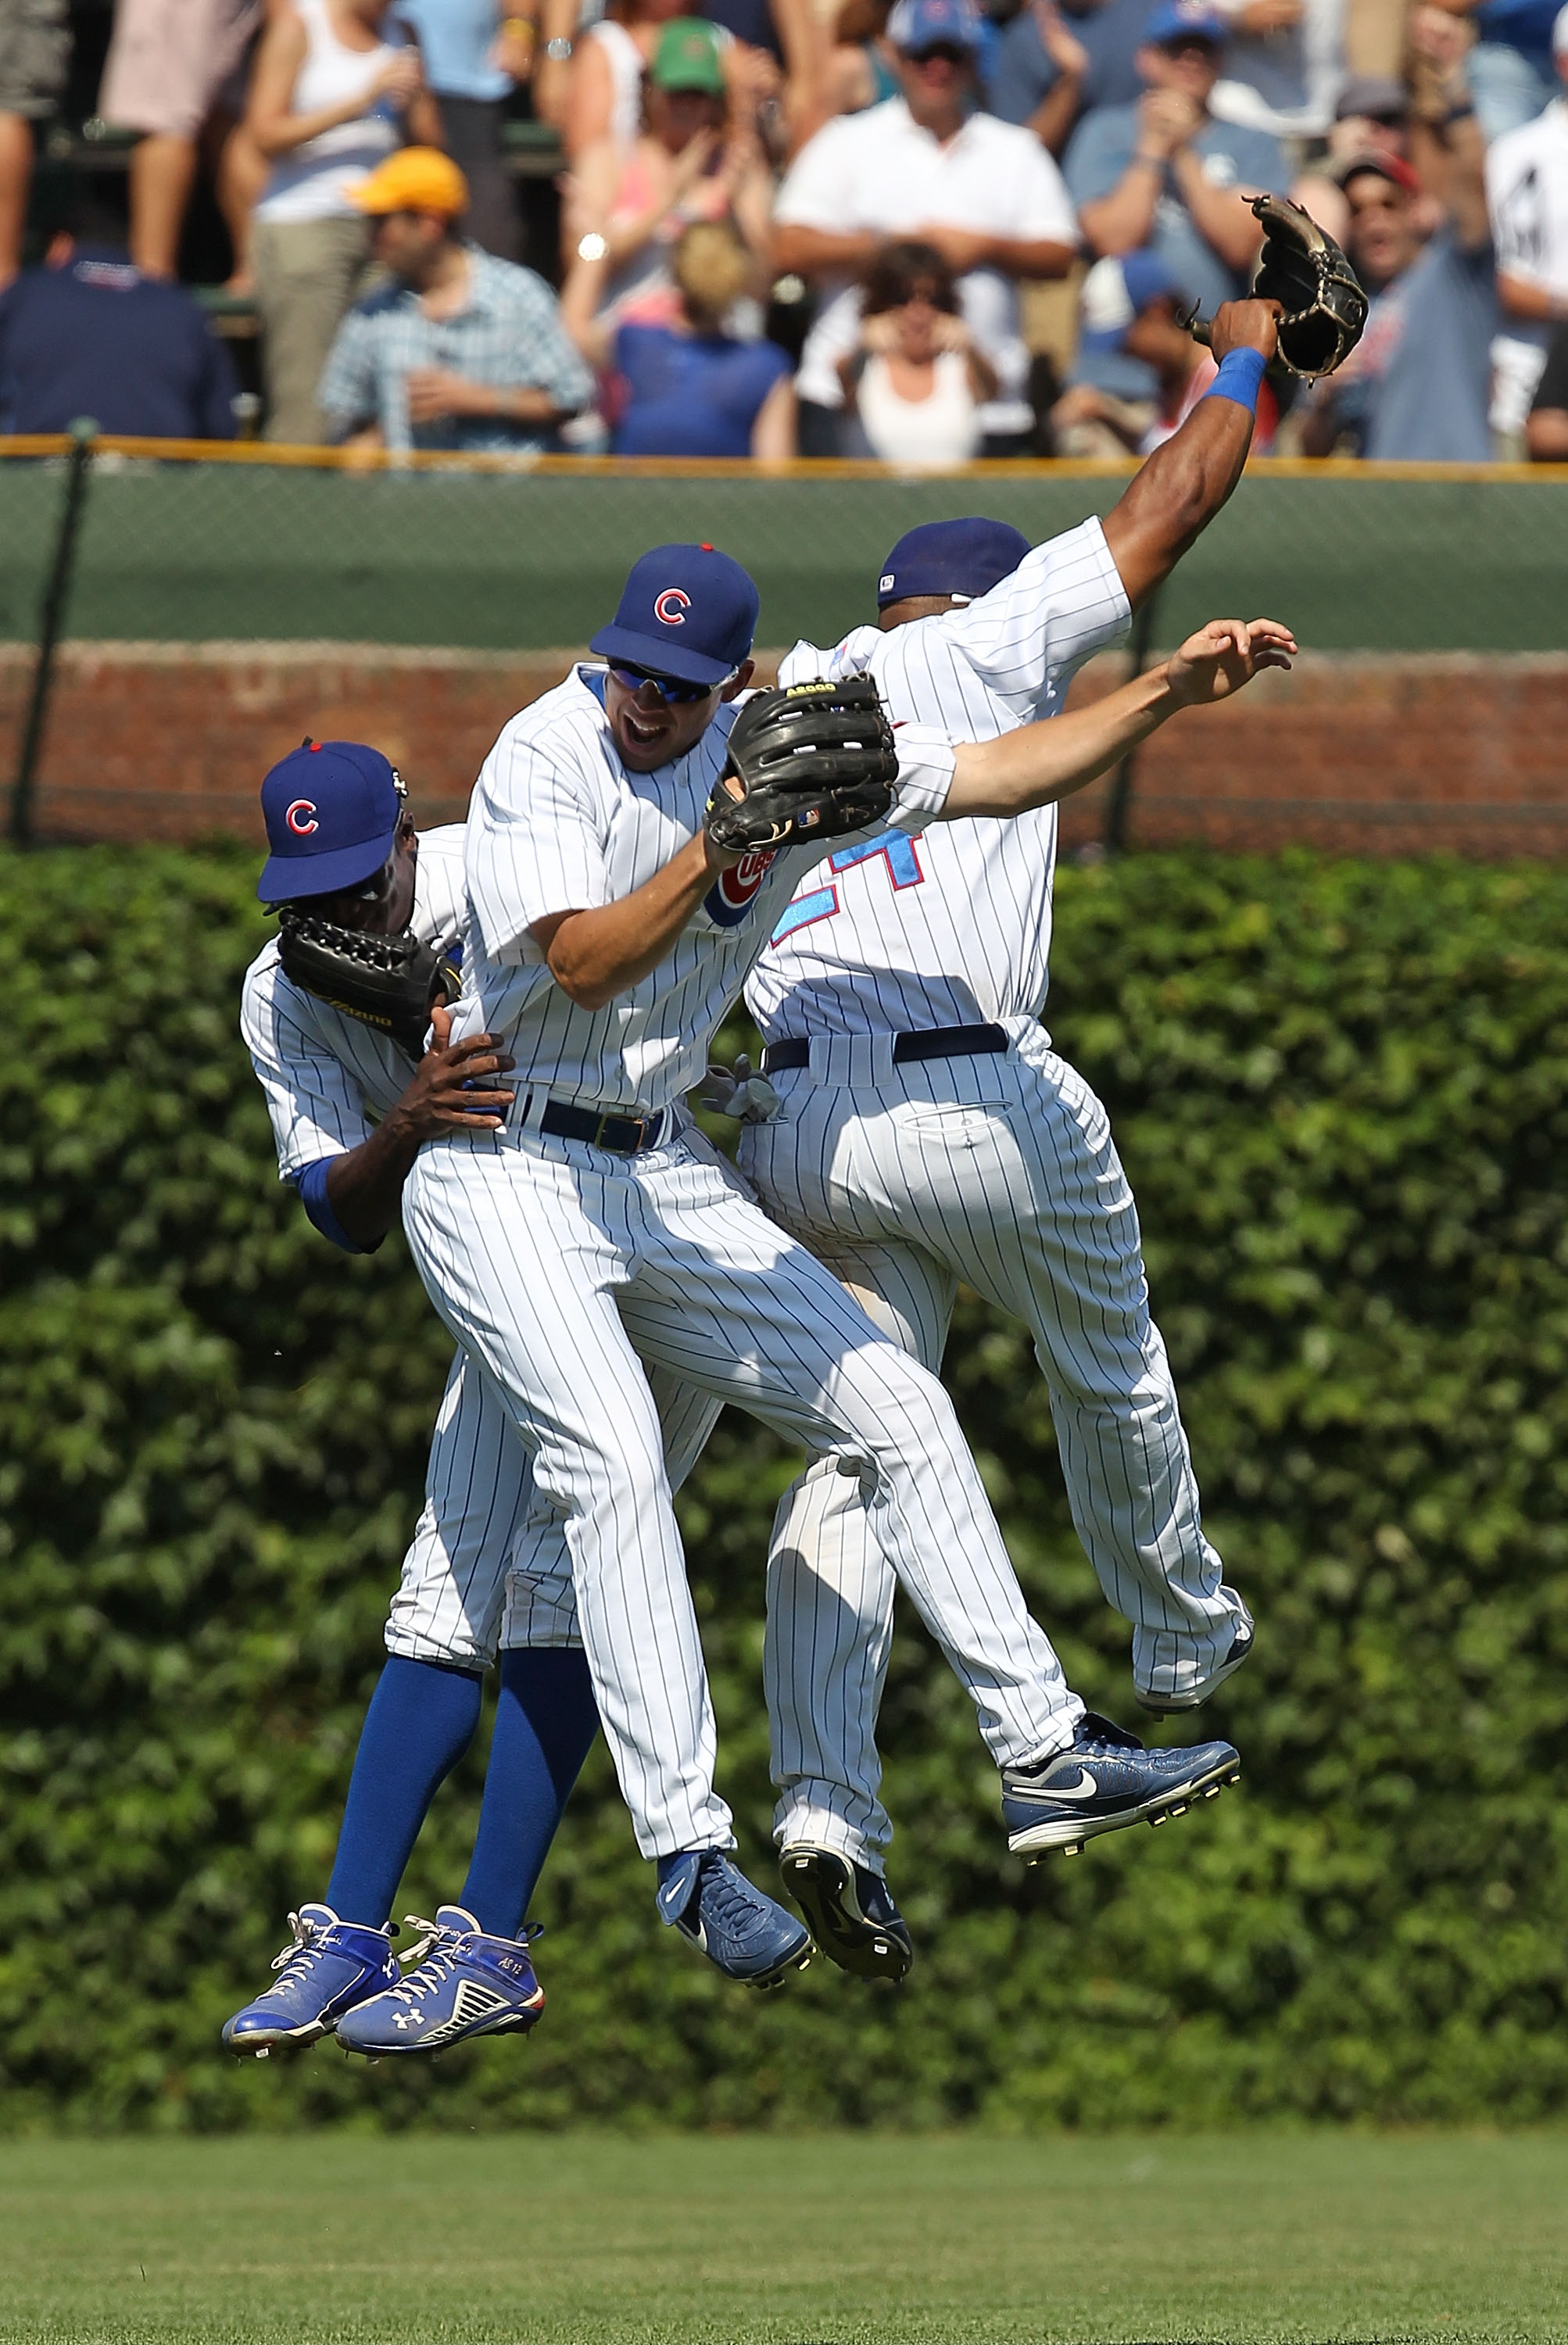 CHICAGO - JULY 16: (L-R) Alfonso Soriano #12, Tyler Colvin #21 and Marlon Byrd #24 of the Chicago Cubs celebrate a win over the Philadelphia Phillies at Wrigley Field on July 16, 2010 in Chicago, Illinois. The Cubs defeated the Phillies 4-3. (Photo by Jon